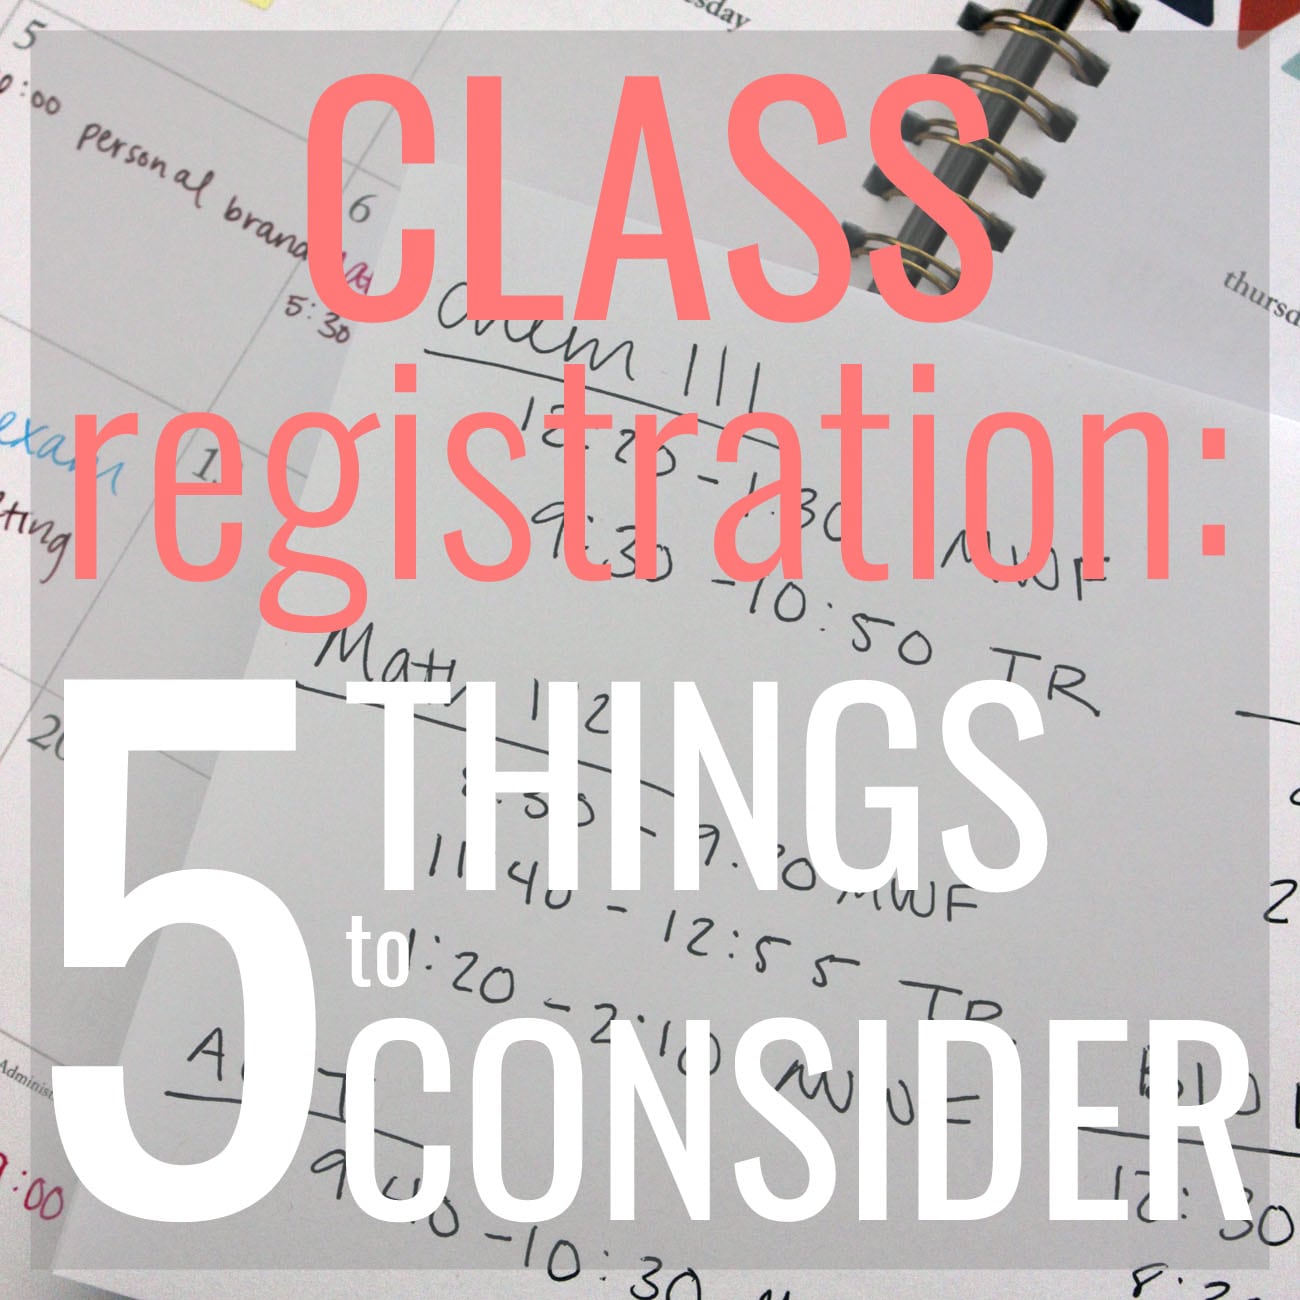 5 things to consider when registering for classes